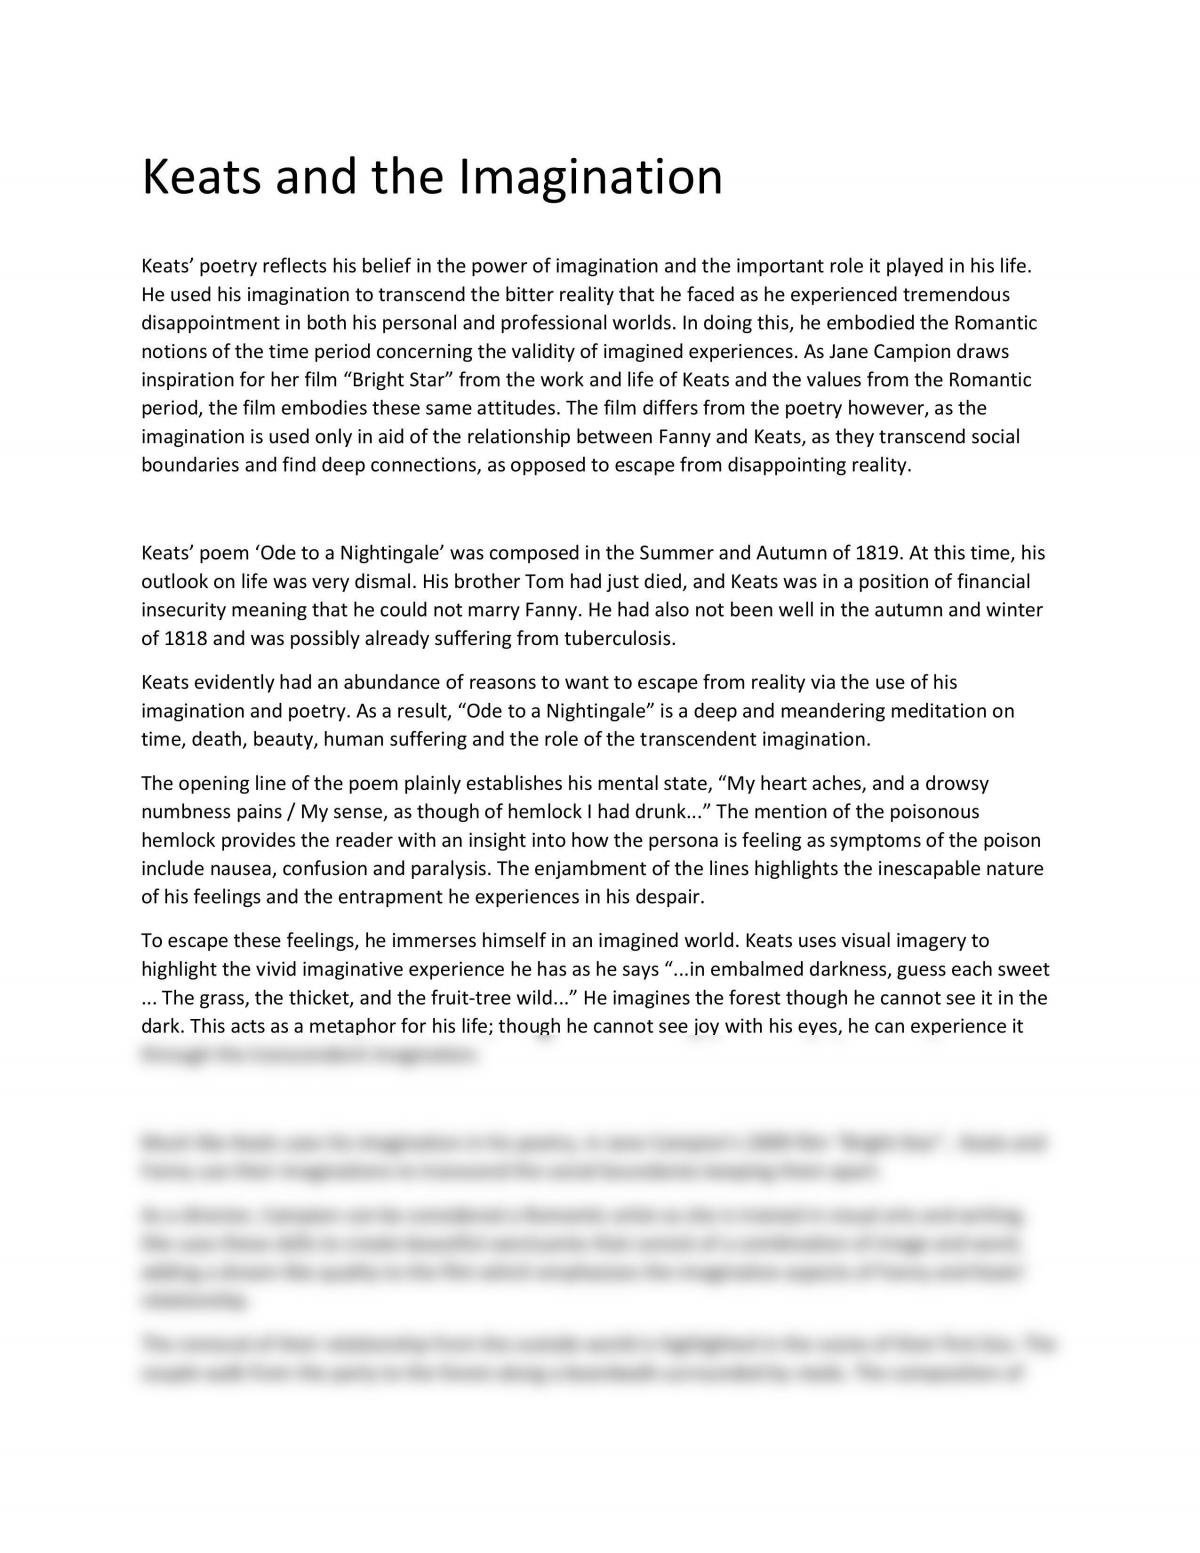 Keats and the Imagination Speech  - Page 1